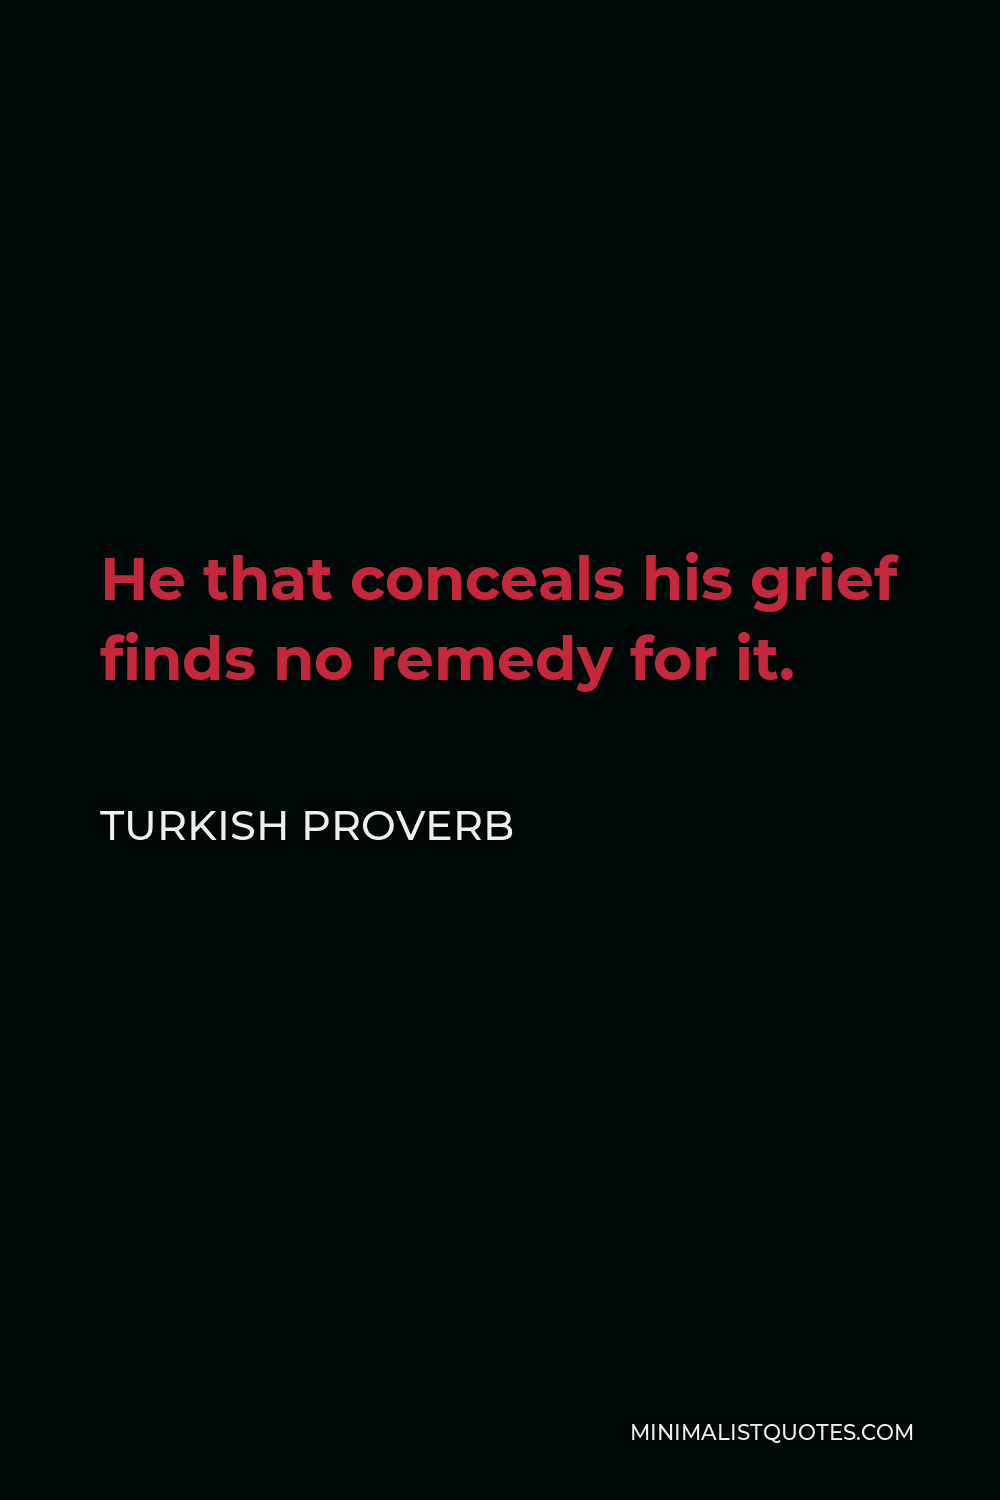 Turkish Proverb Quote - He that conceals his grief finds no remedy for it